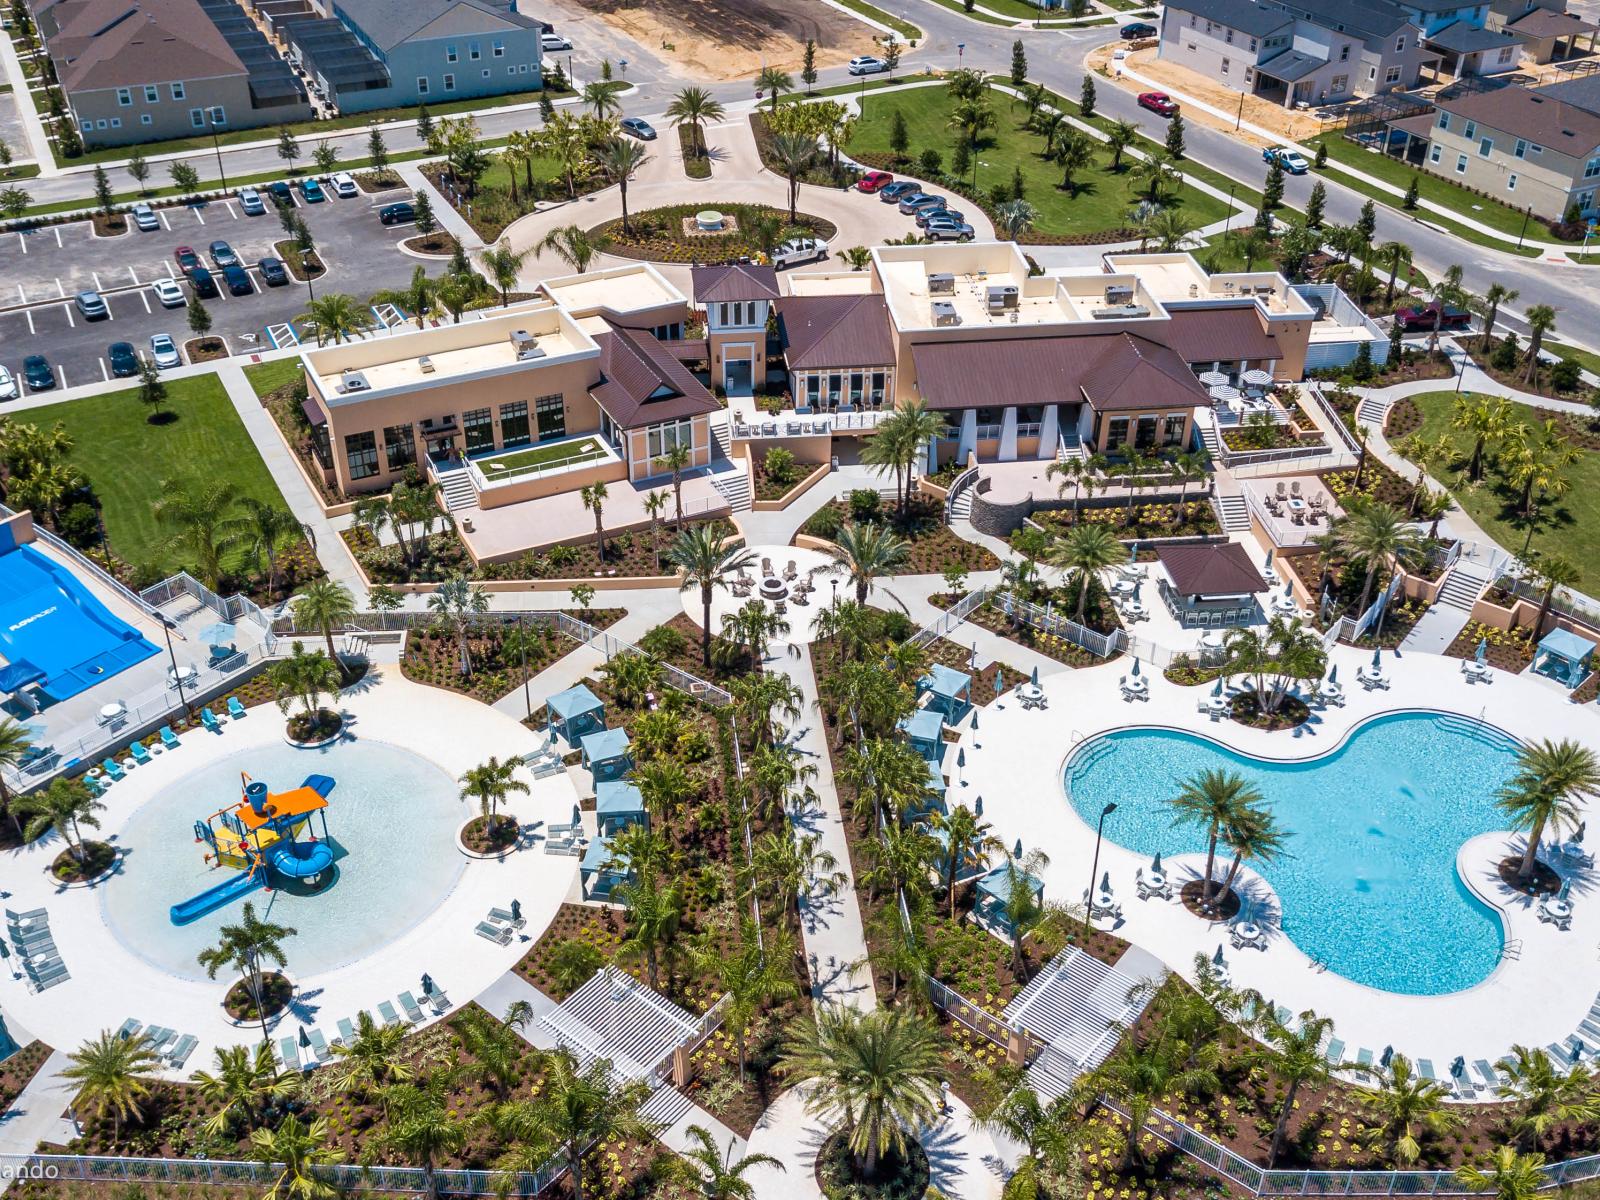 Solara Resort Aerial View on Clubhouse